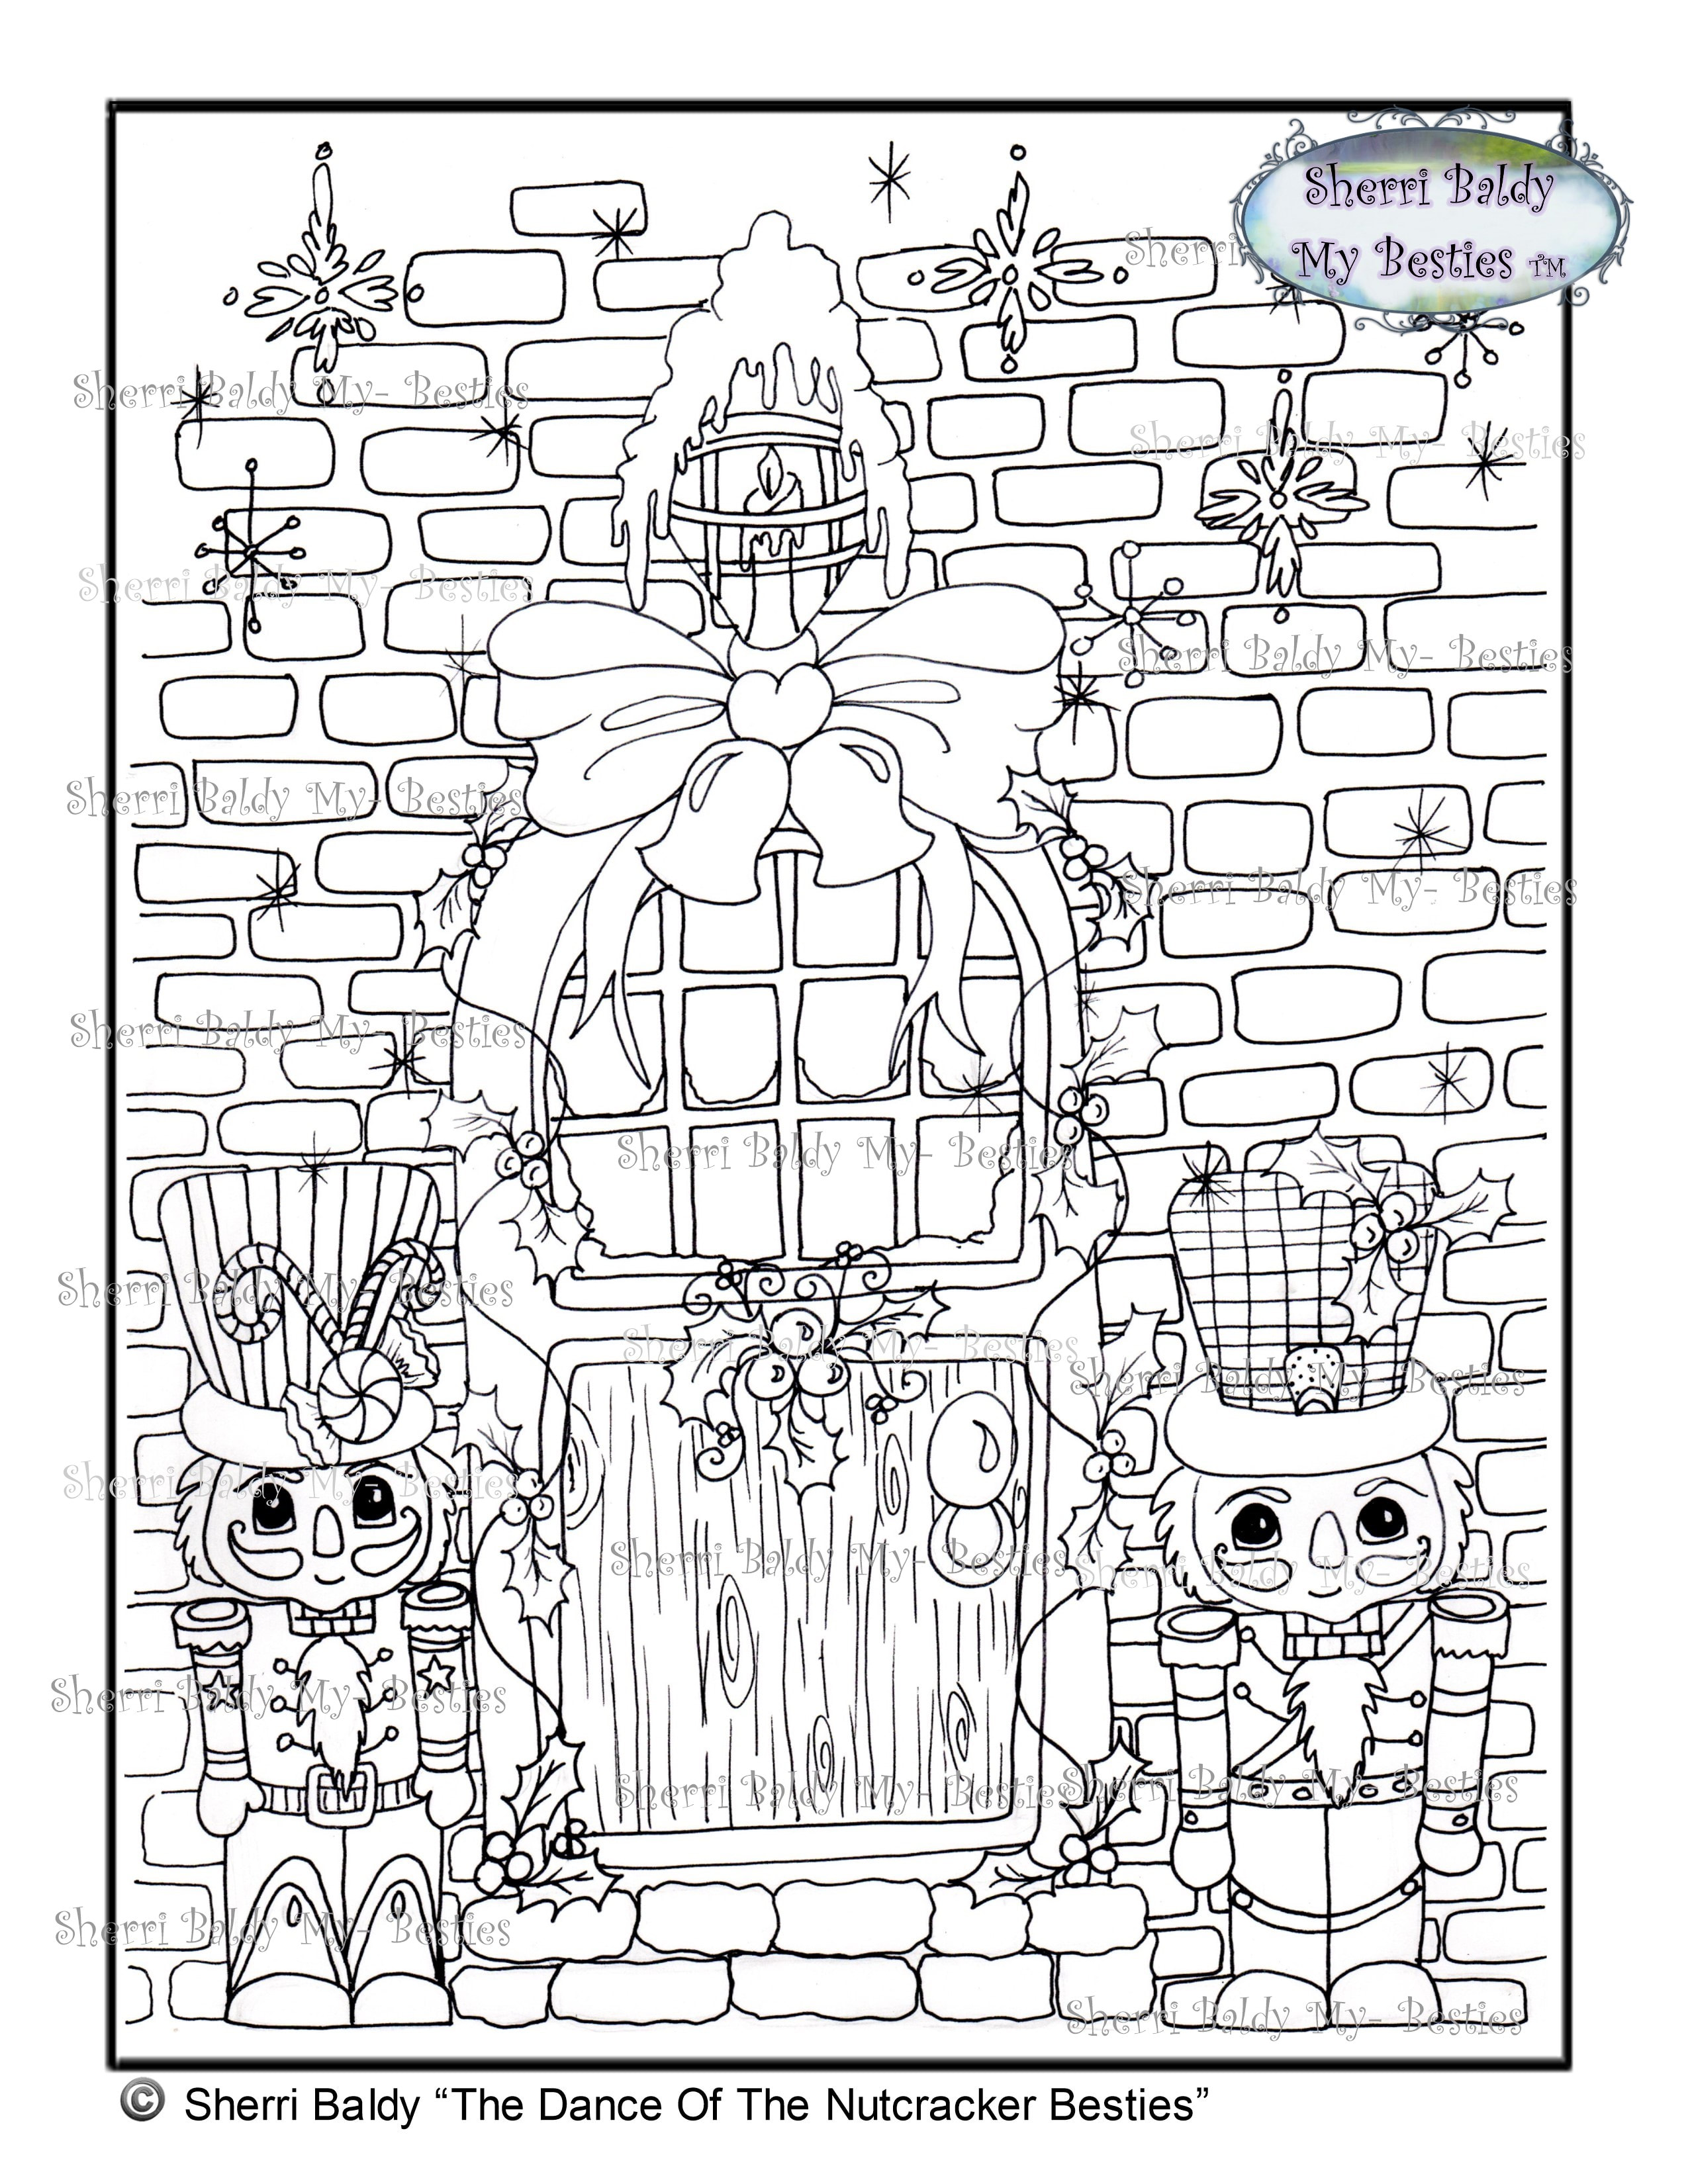 Colouring In Fun - Glittery Tapping Wonderland